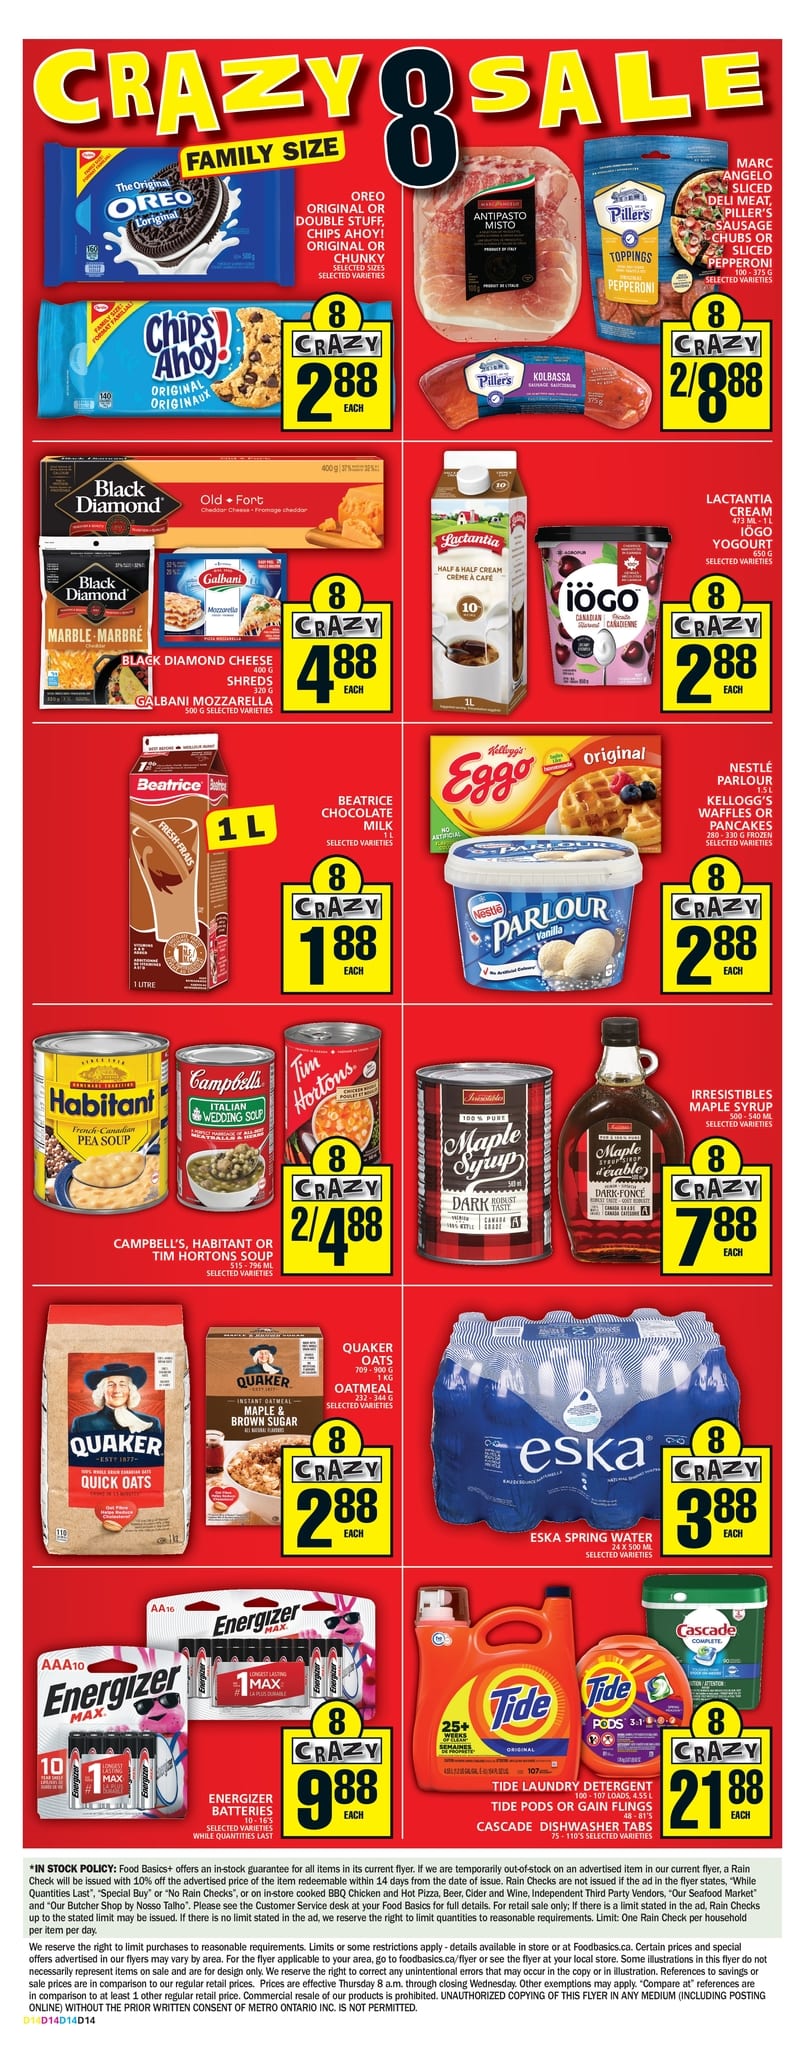 Food Basics - Weekly Flyer Specials - Page 2